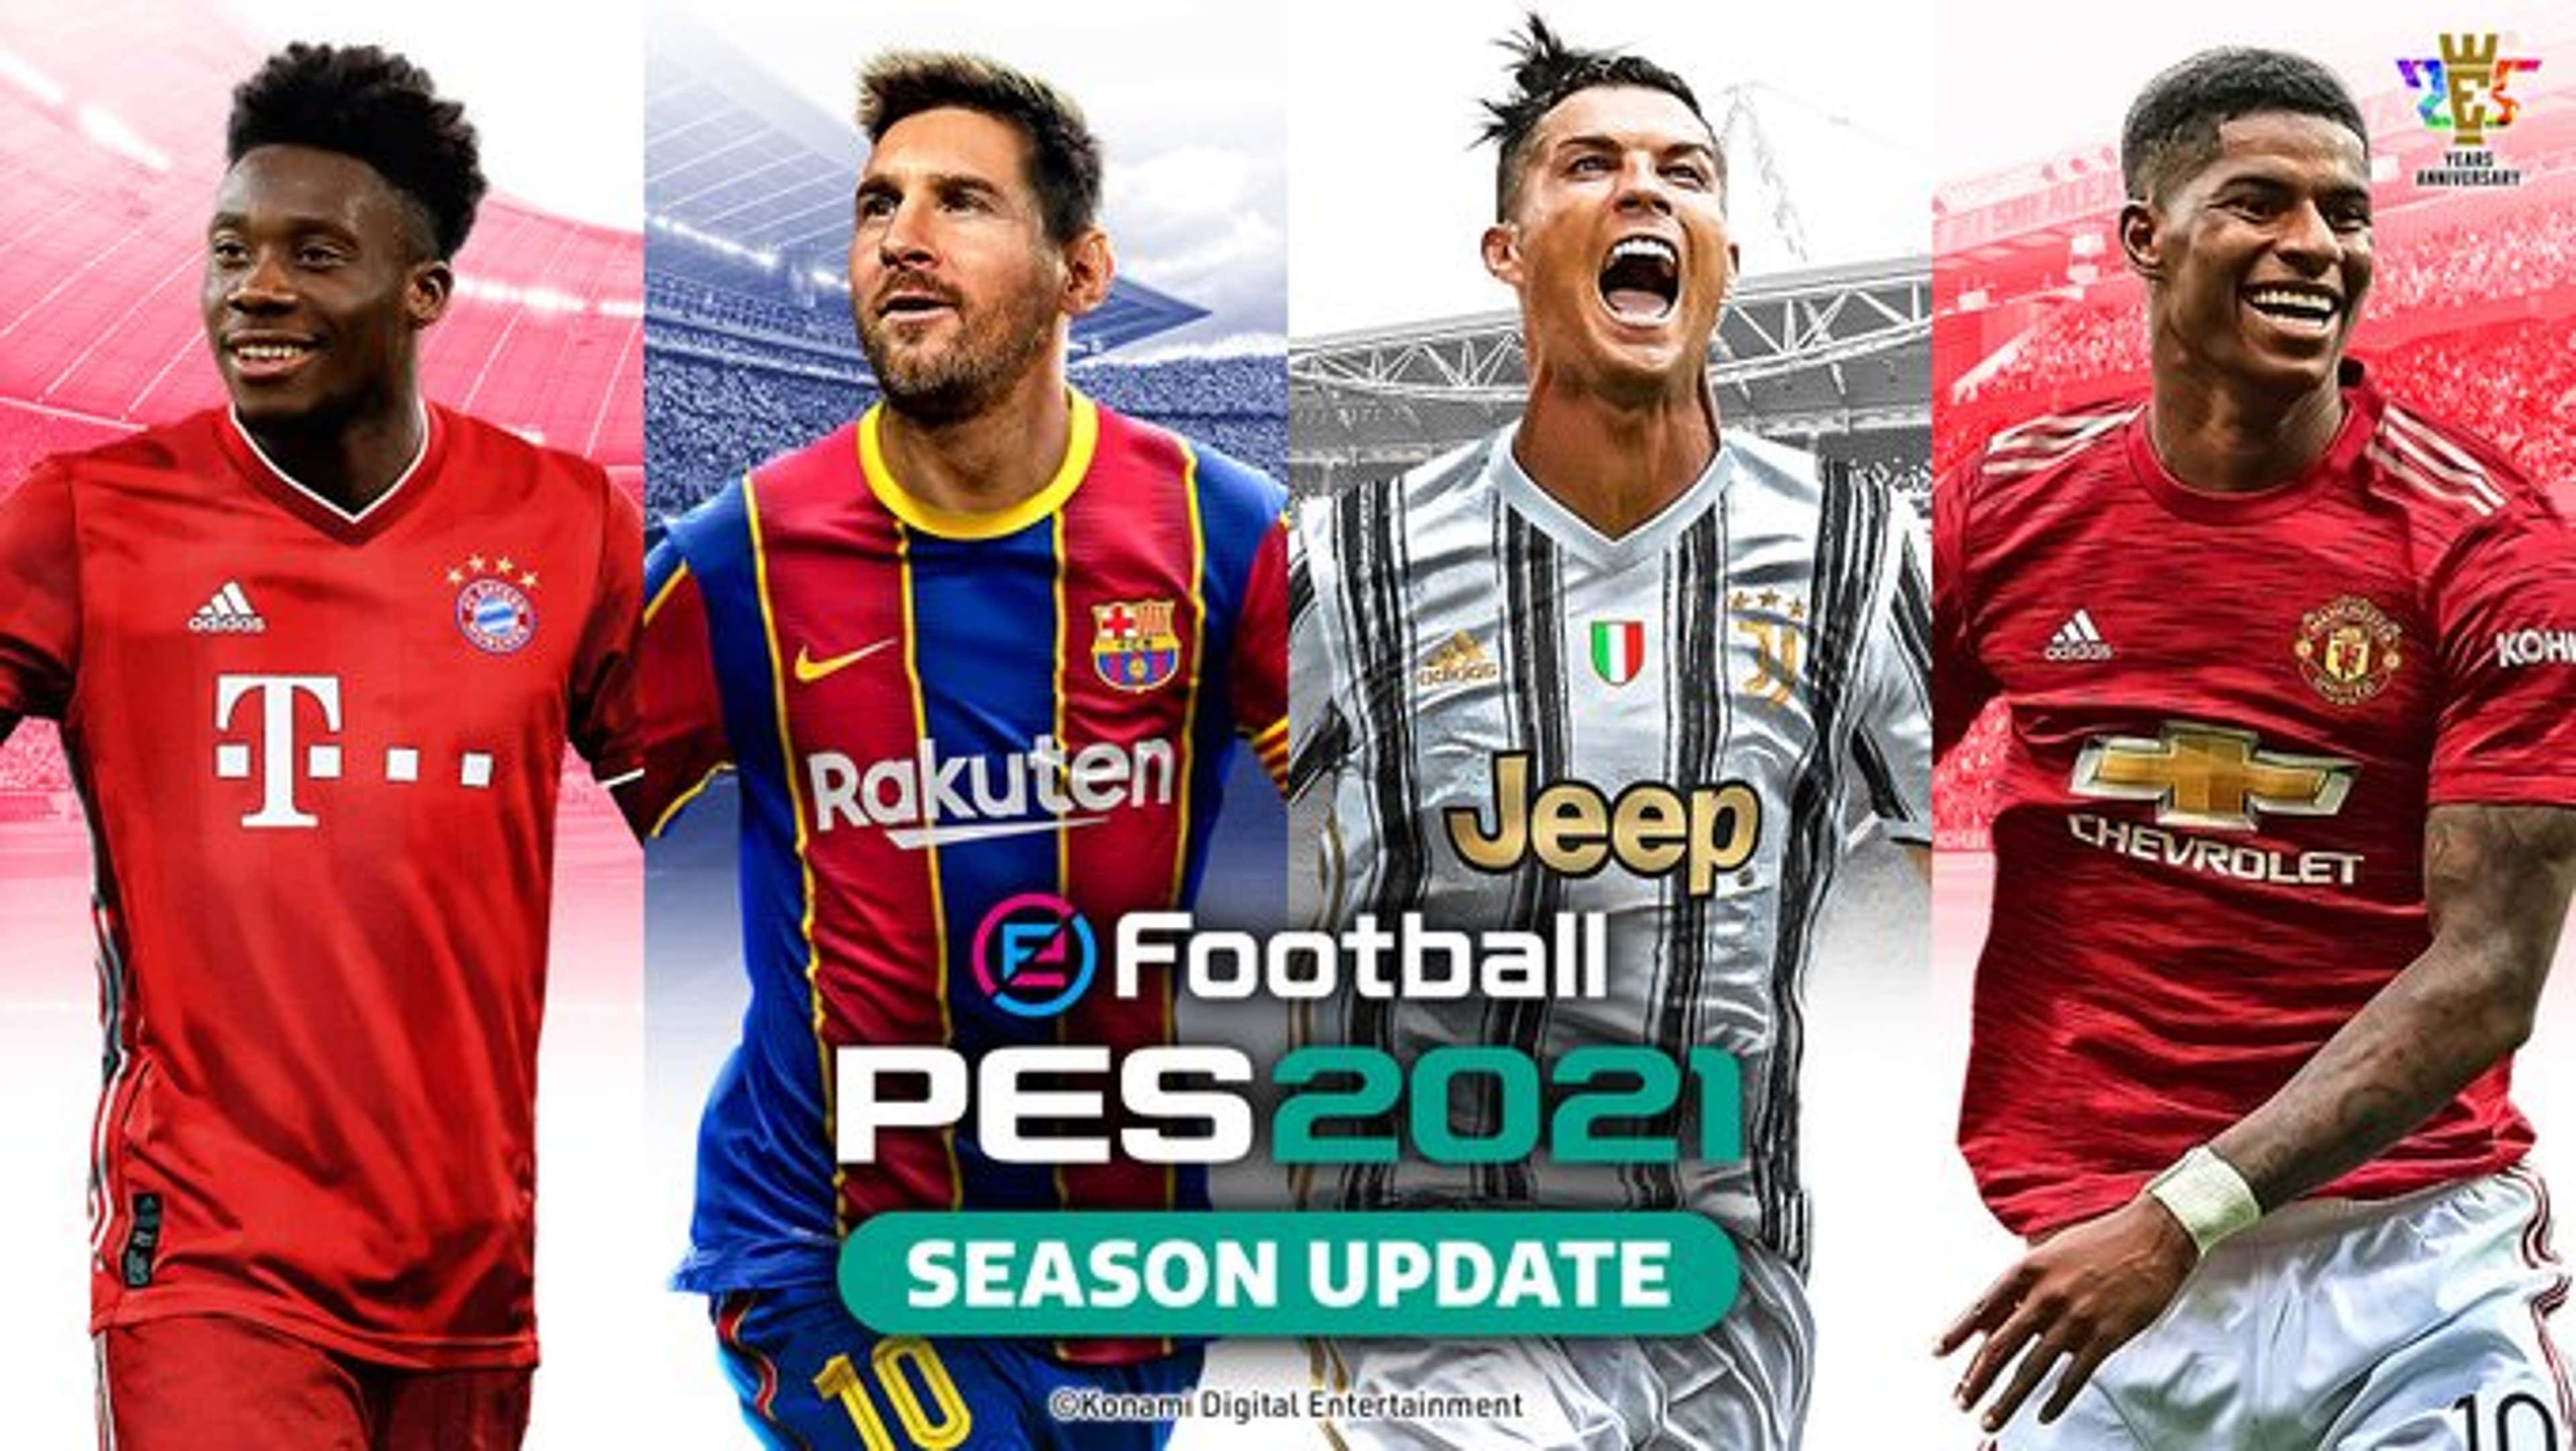 Embed only PES 2021 cover